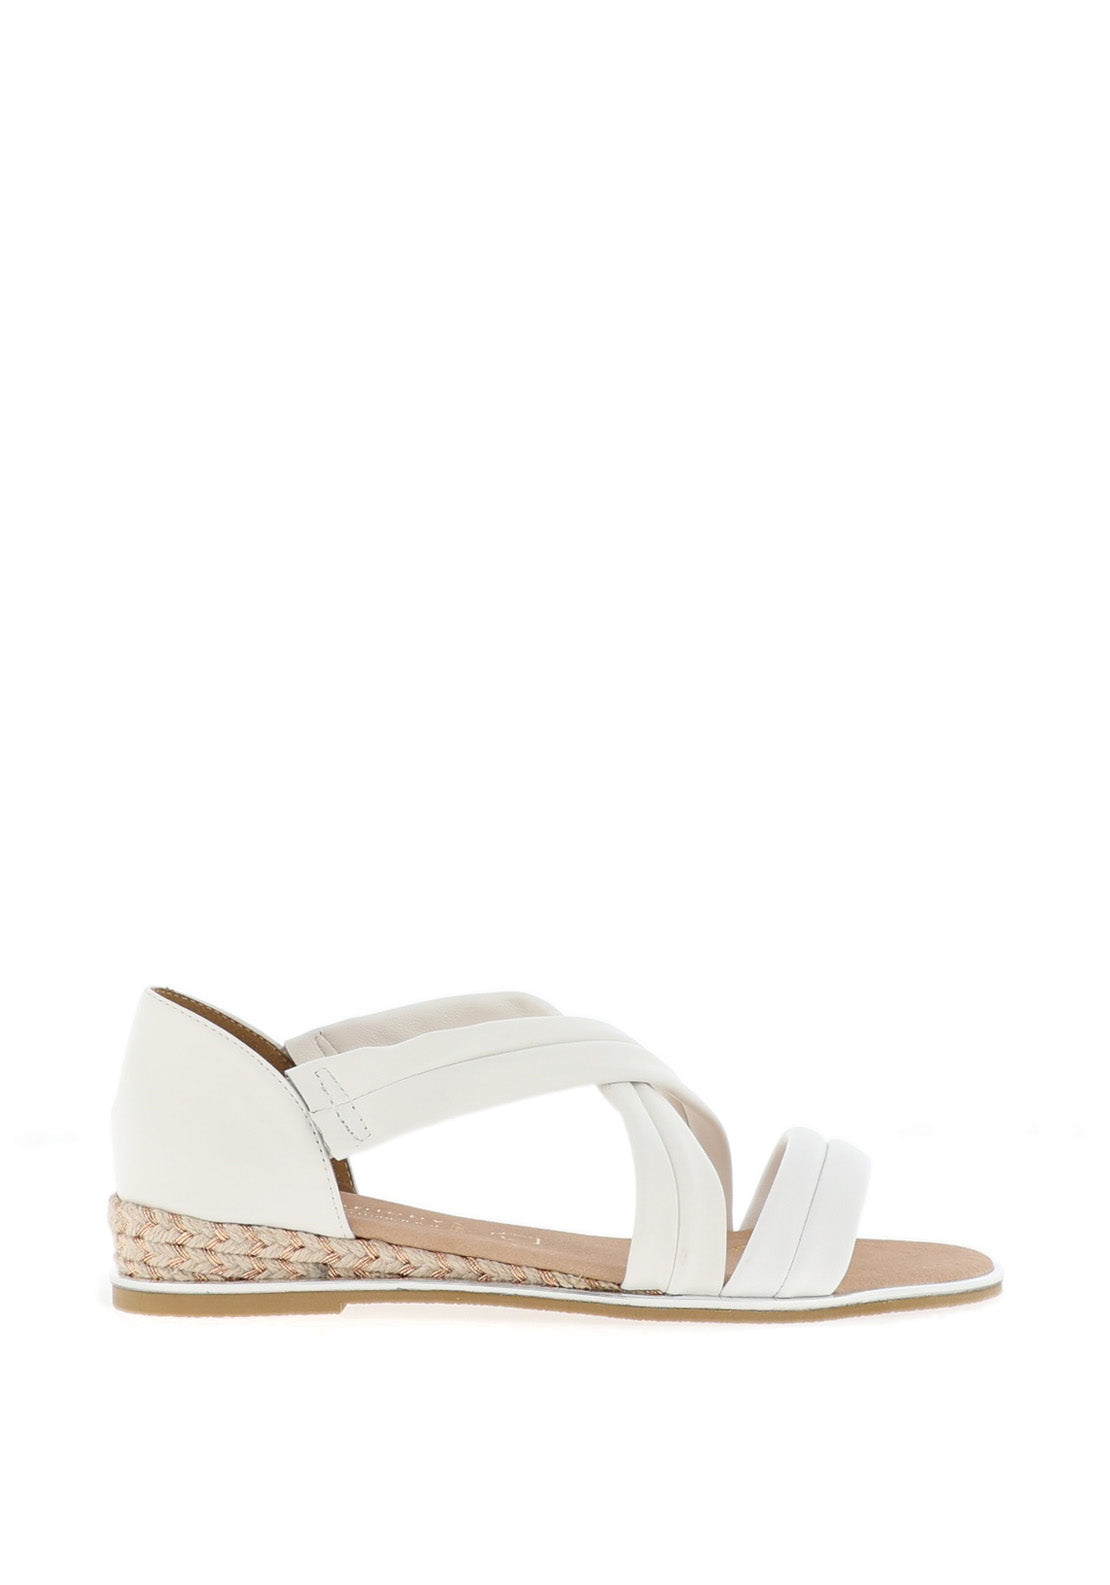 Kate Appleby Rothes Strappy Sandals, Snow White - McElhinneys